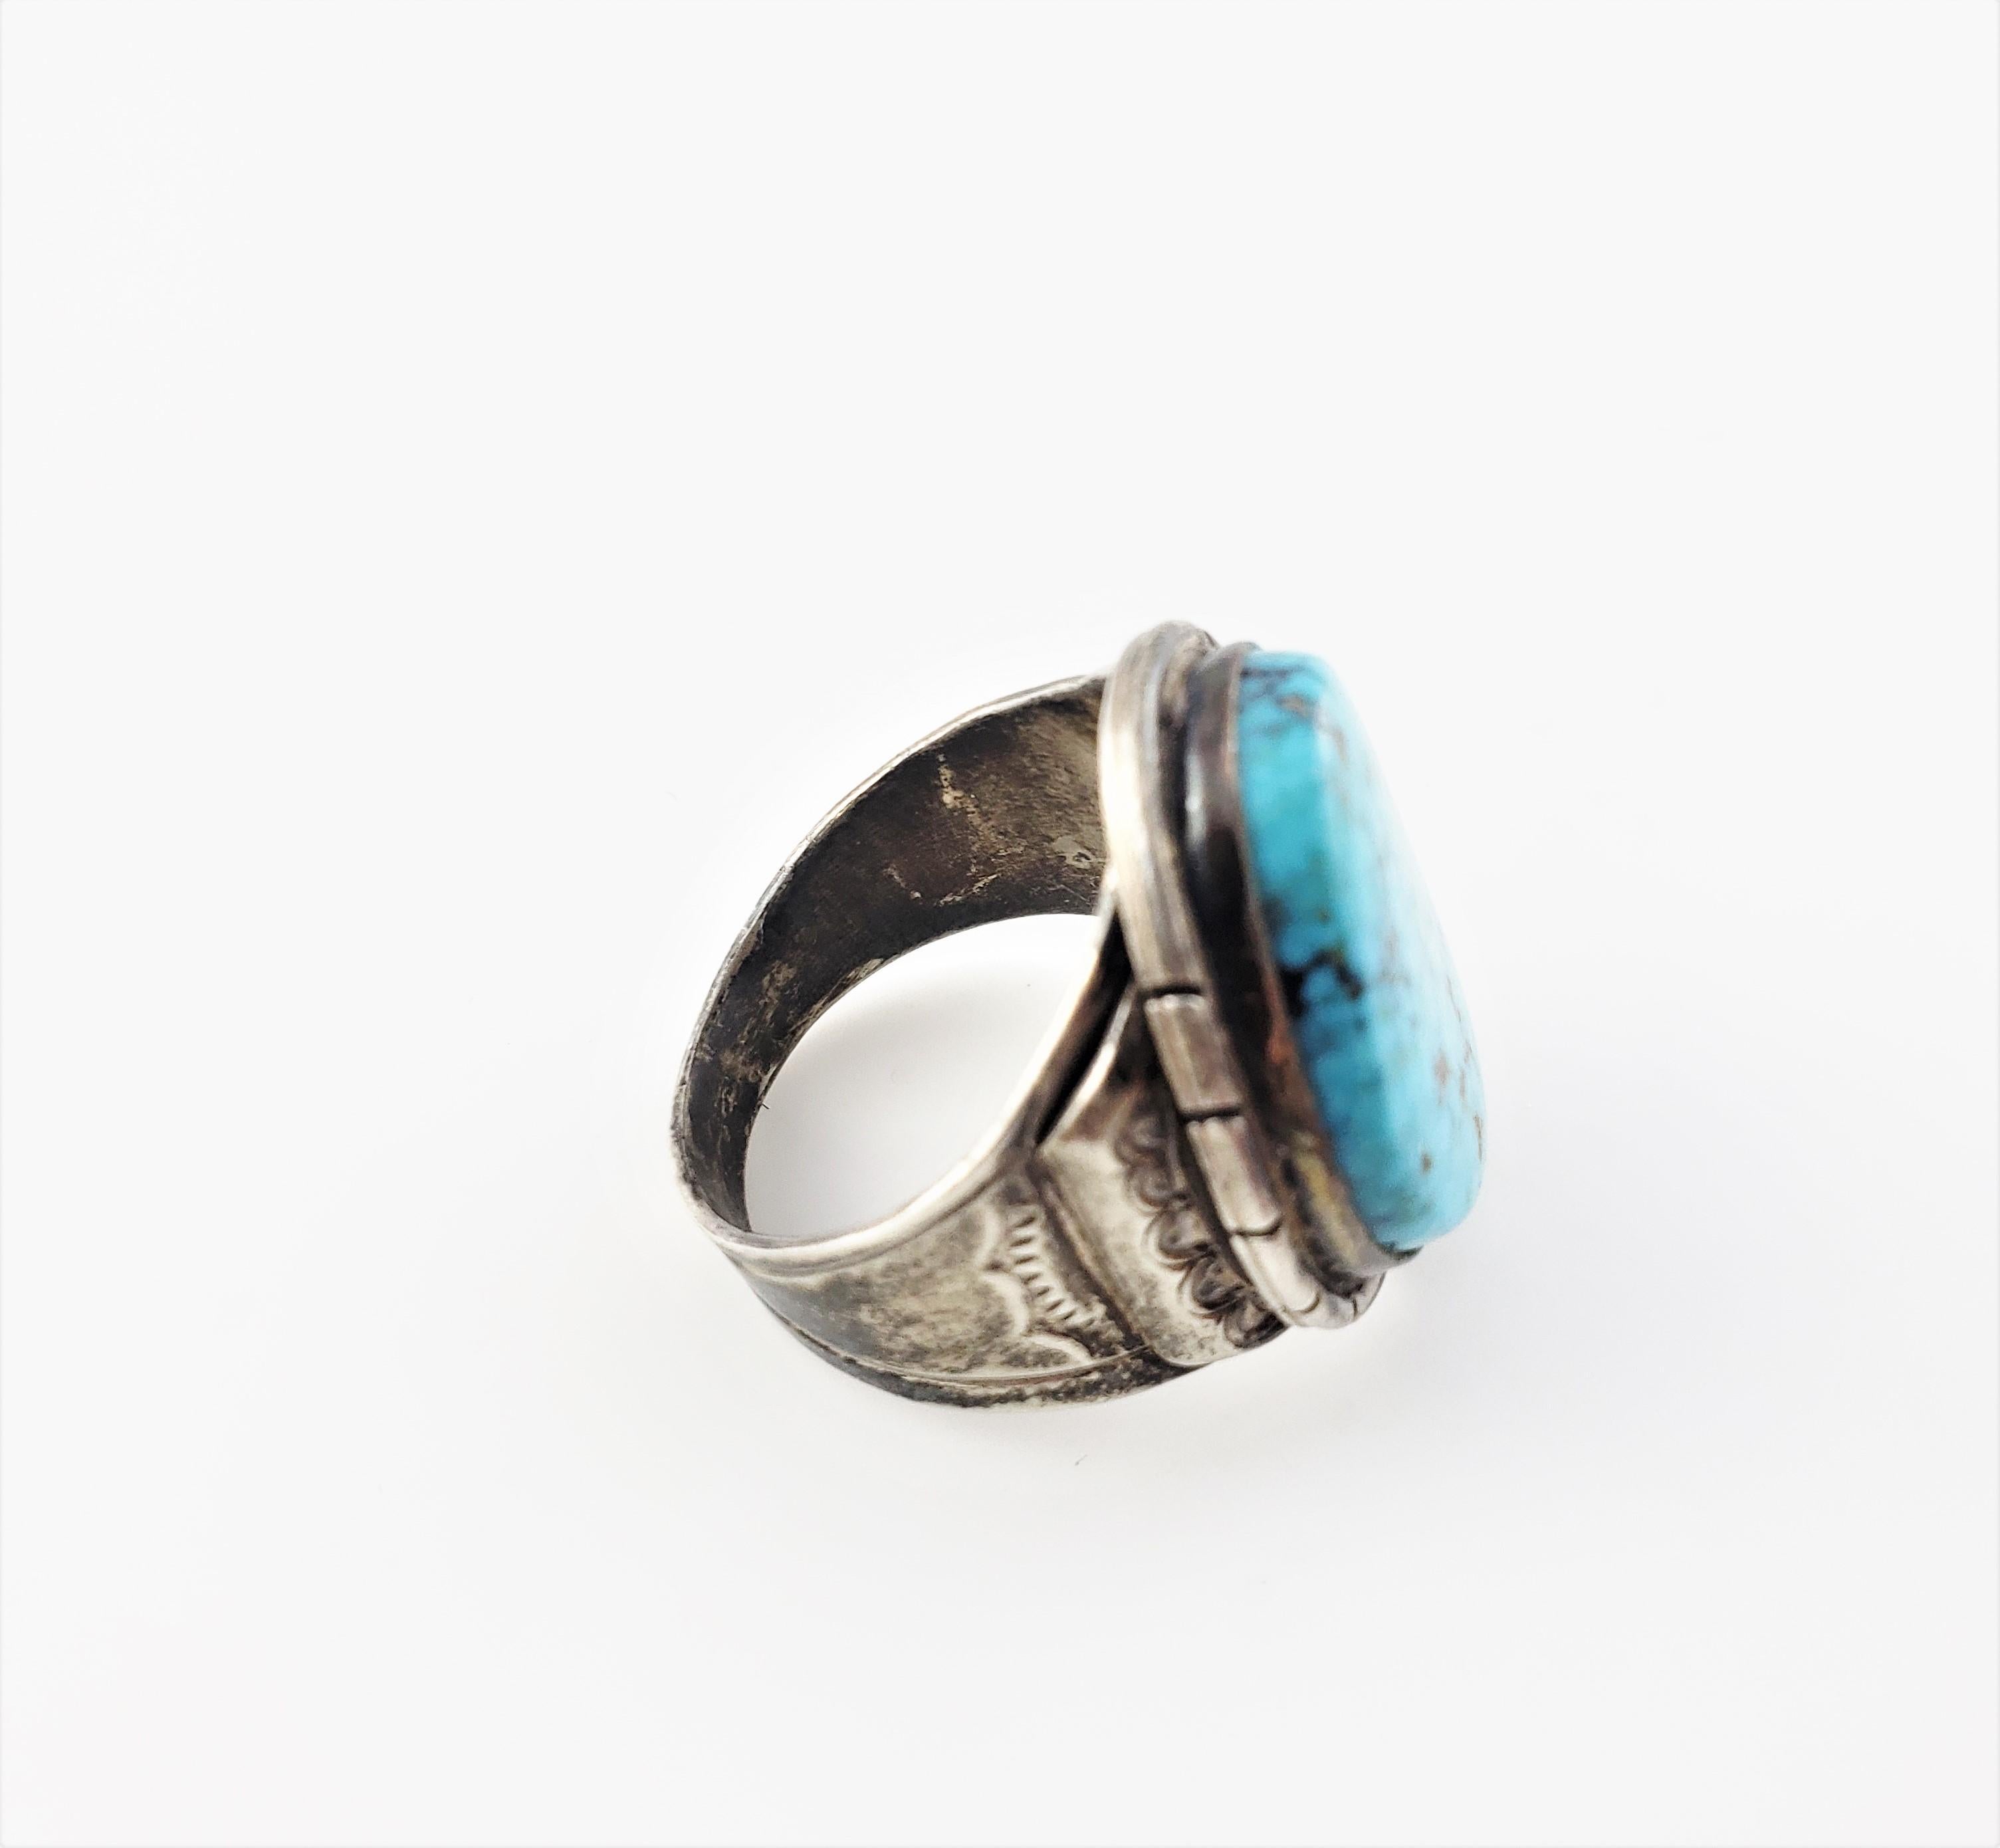 Vintage Navajo Tony Guerro Sterling Silver Turquoise Ring Size 10.5-

This lovely Navajo ring features one turquoise stone (23 mm x 18 mm) set in classic sterling silver. Top of ring measures 26 mm x
21 mm. Shank: 5 mm.

Ring Size: 10.5

Weight: 9.3